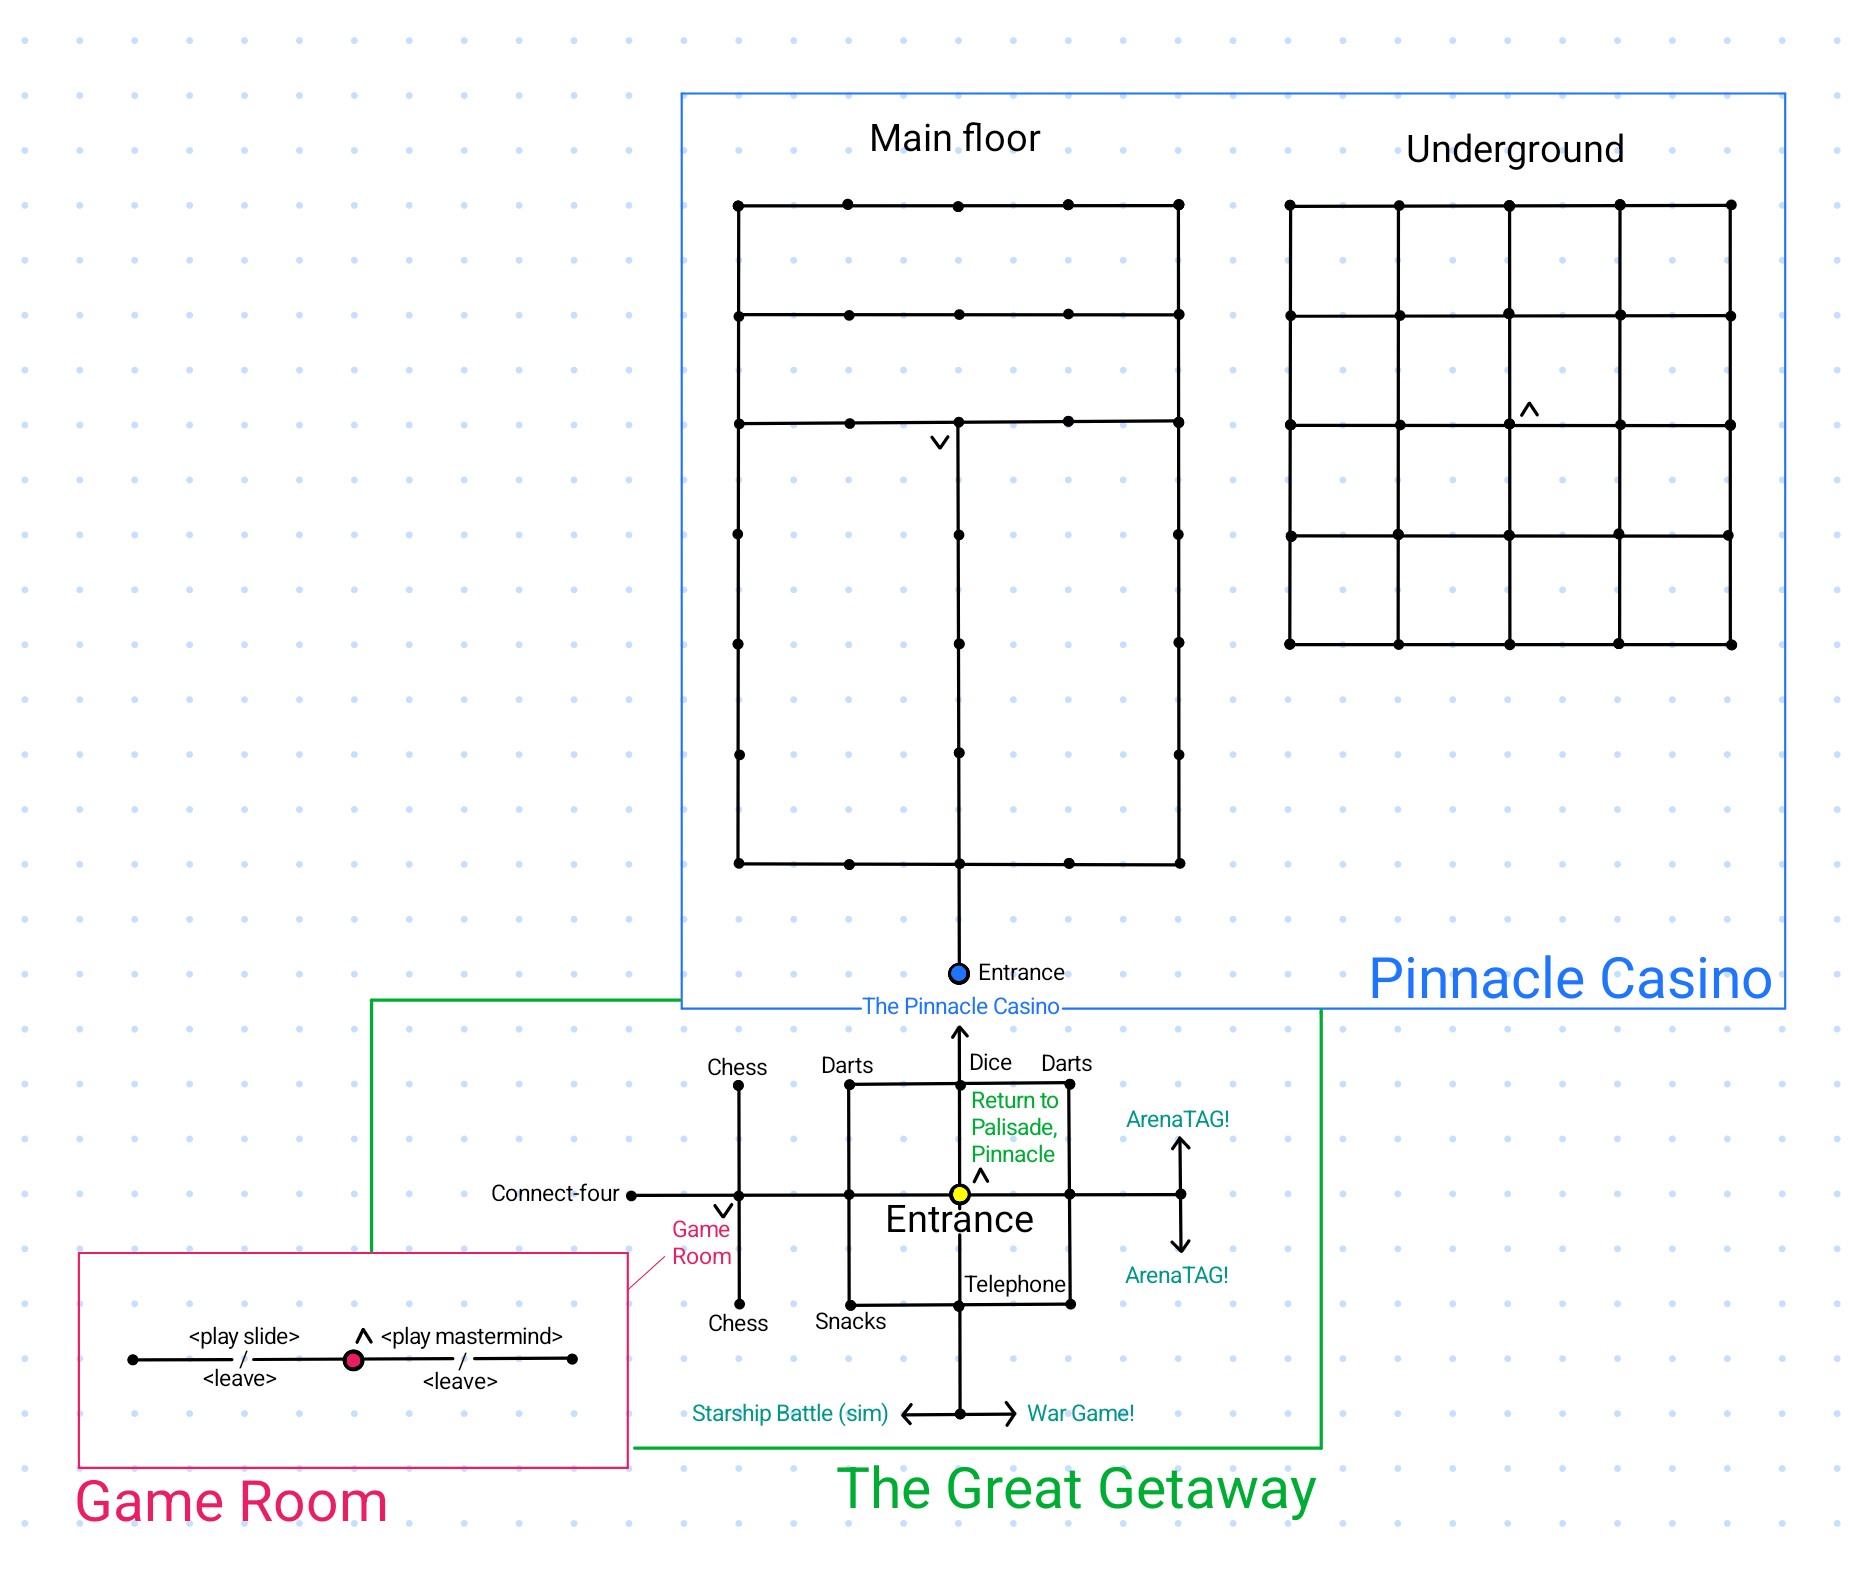 Map of The Great Getaway, which includes Game Room